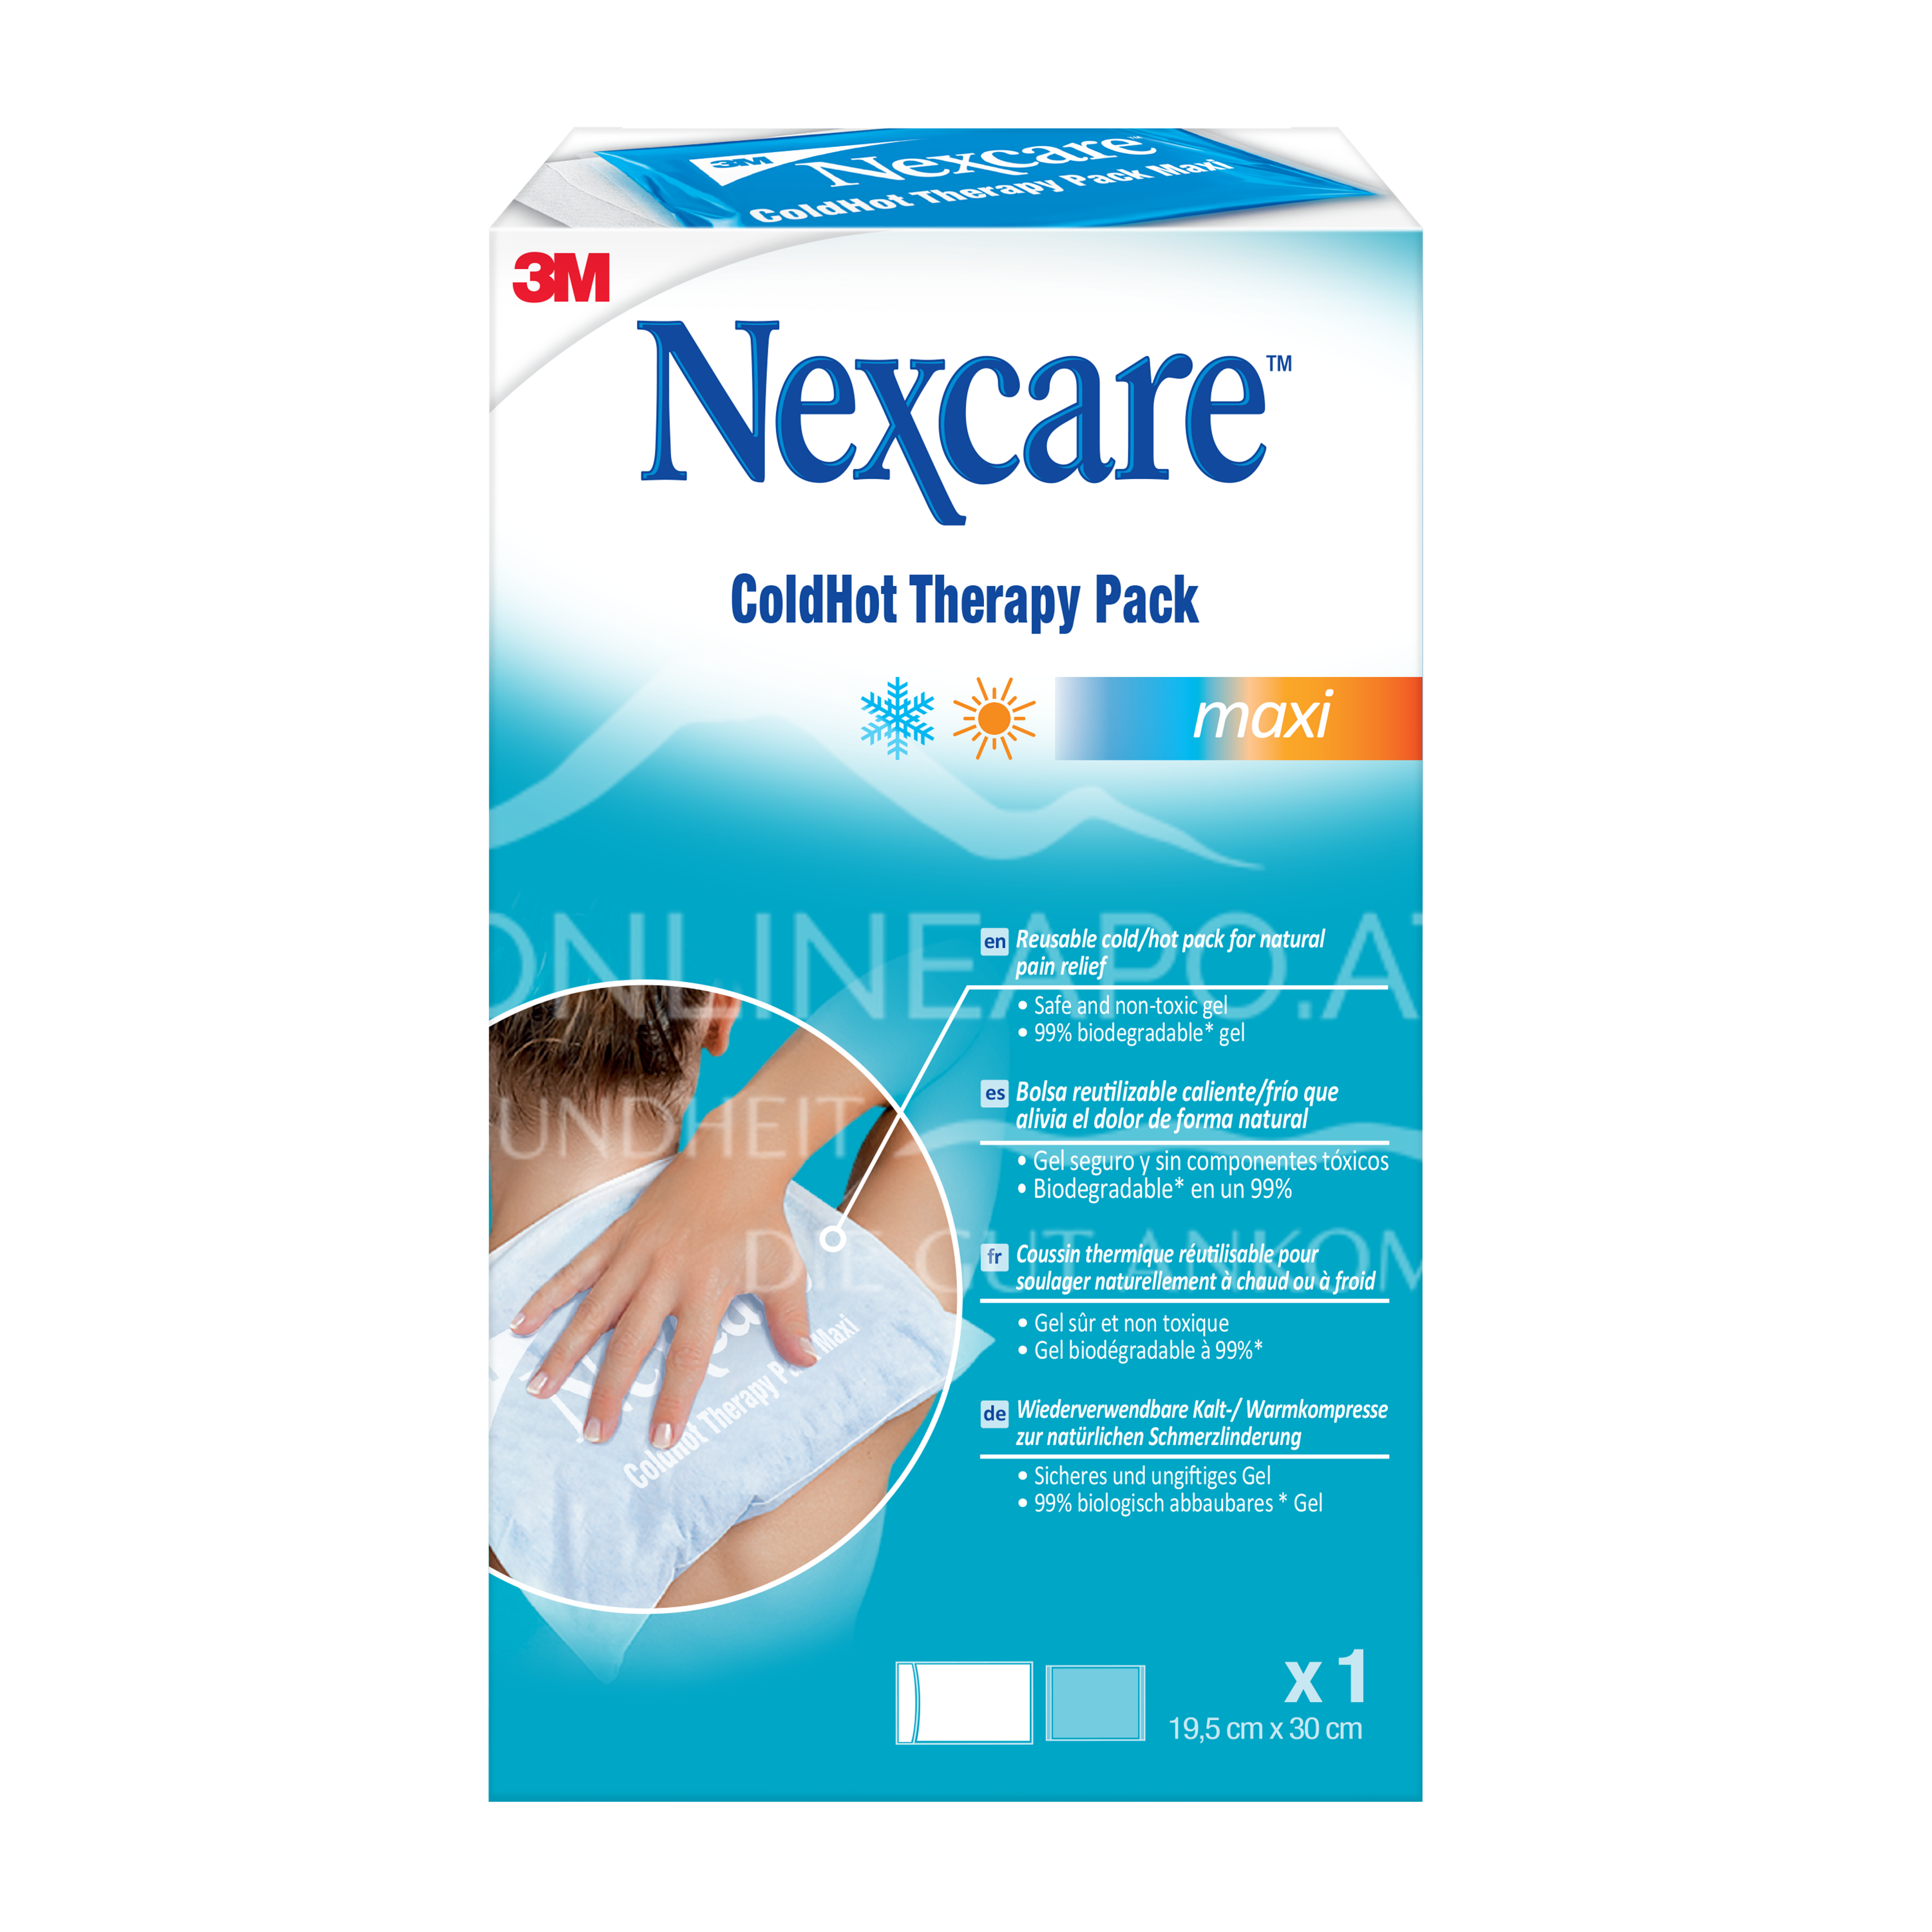 3M Nexcare™ ColdHot Therapy Pack Maxi